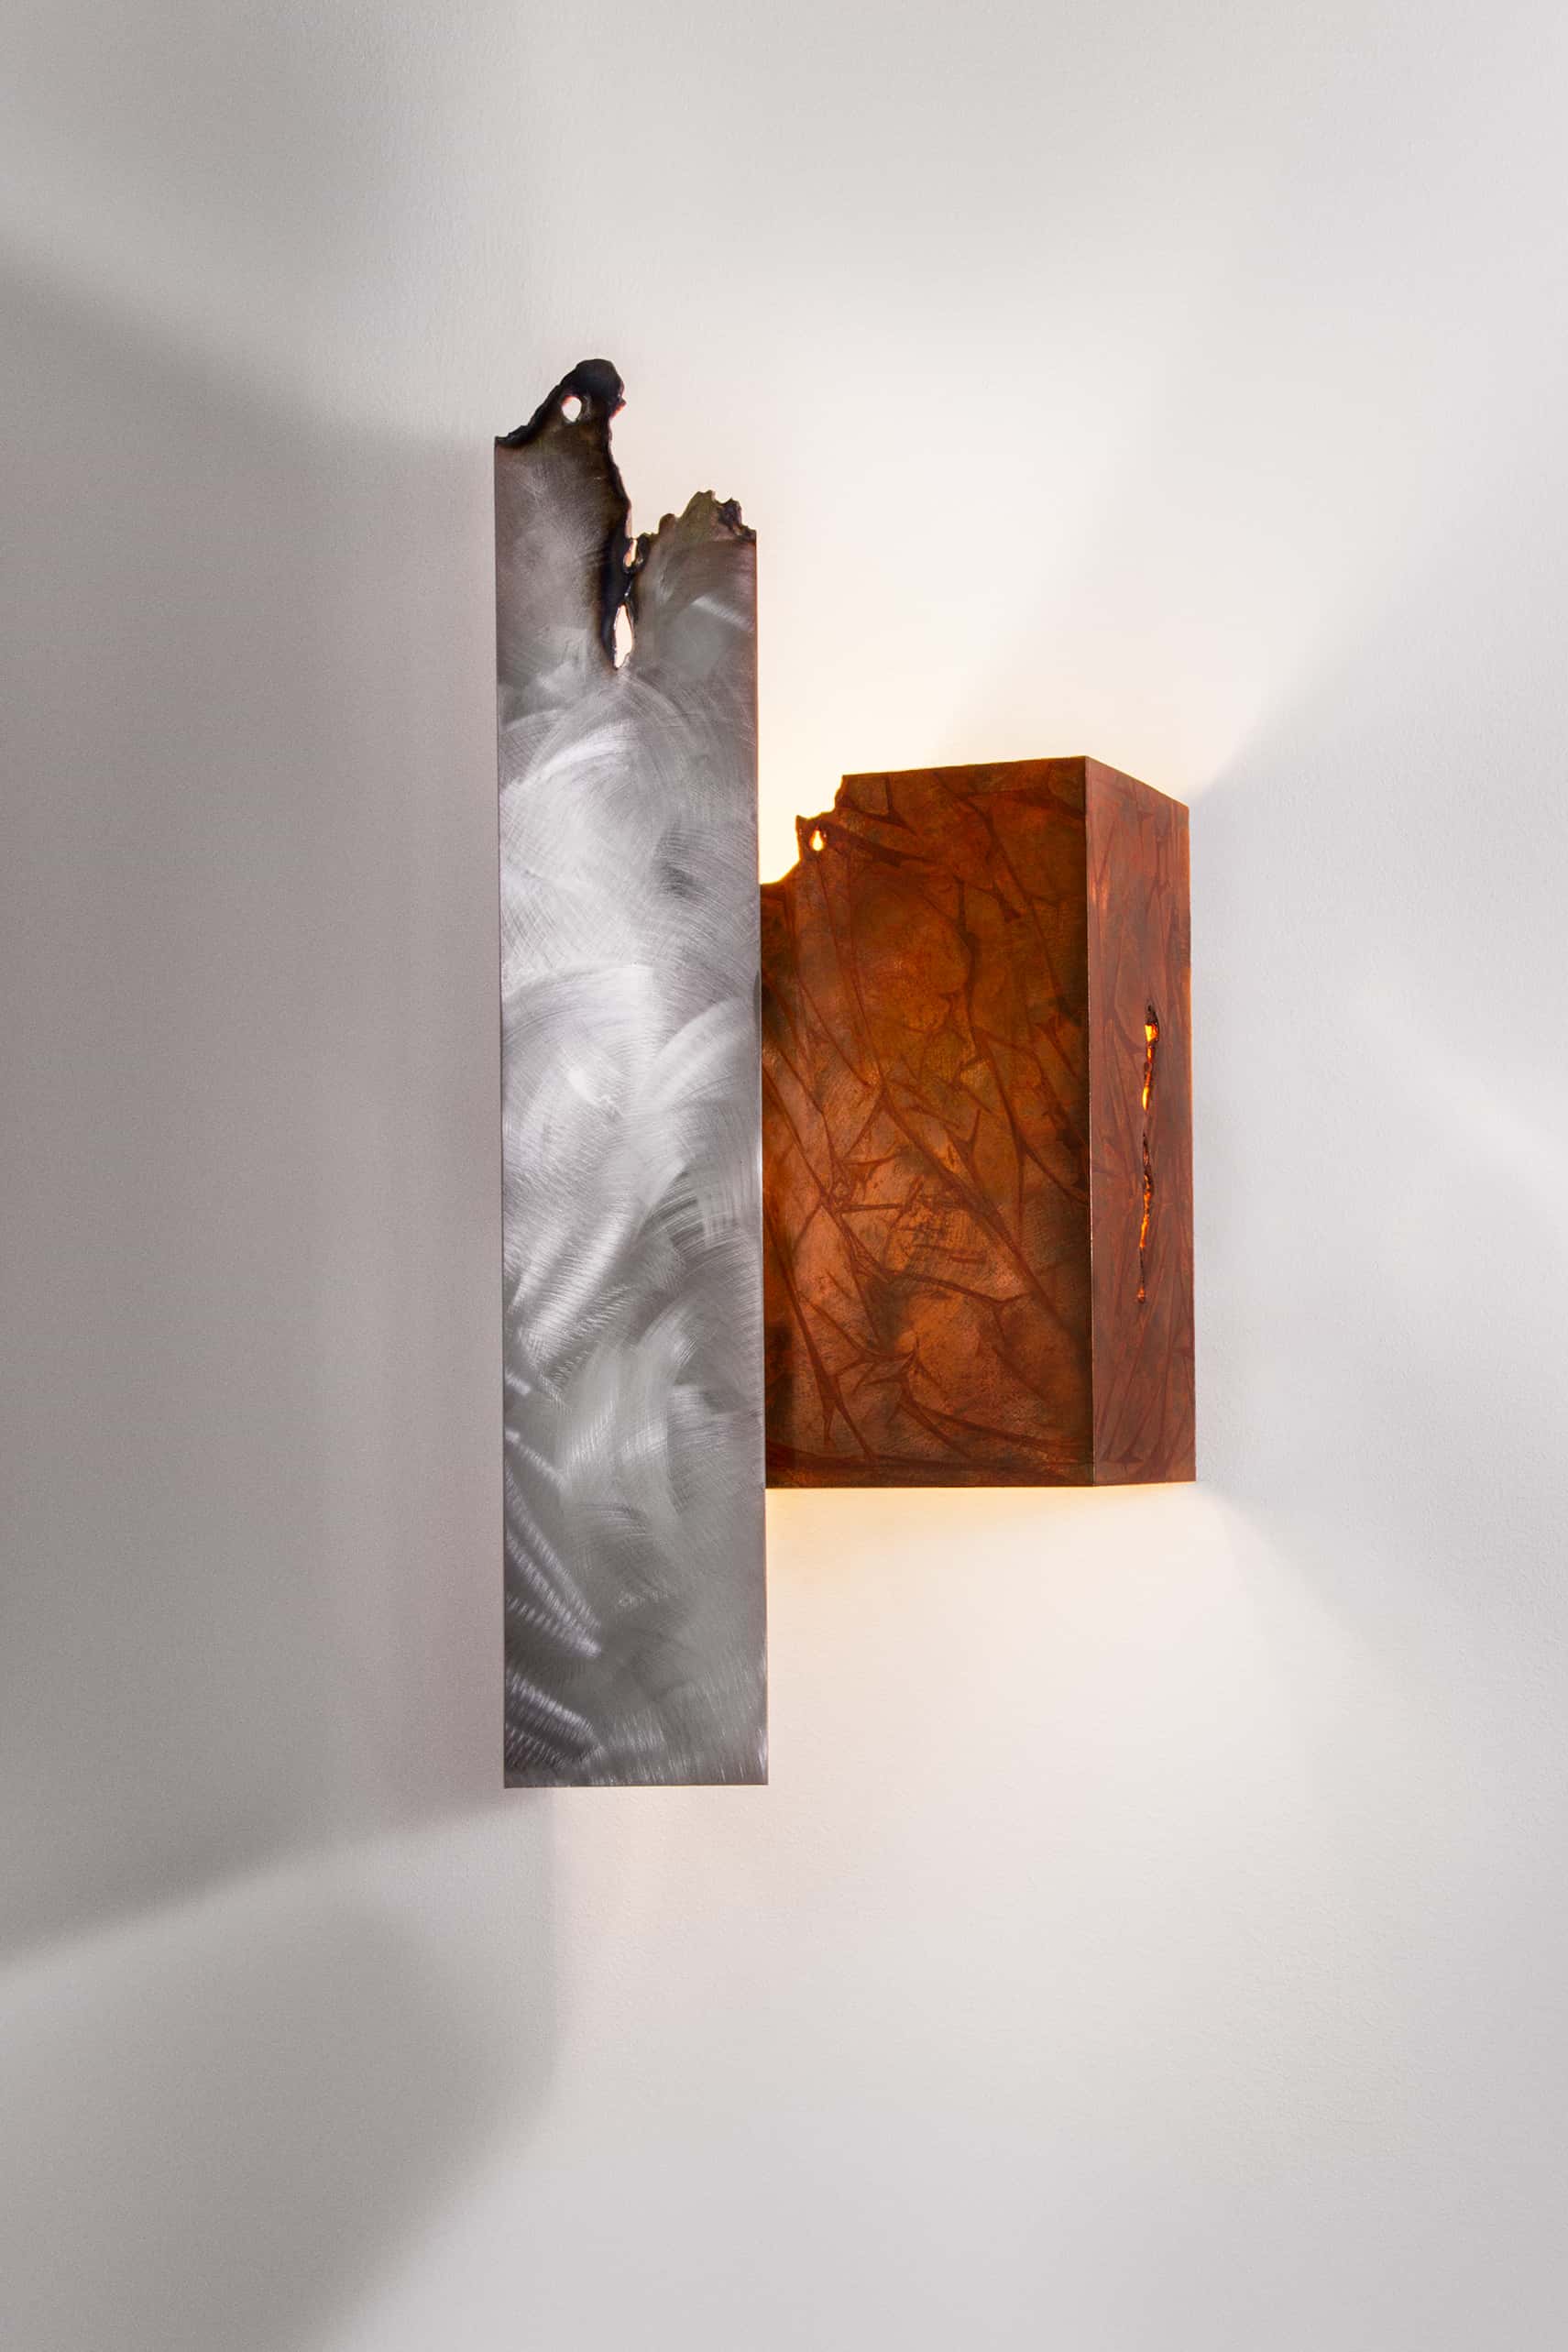 Rustic Sconce, Box Canyon Silver, Southwest Lighting, Mountain Contemporary Lighting